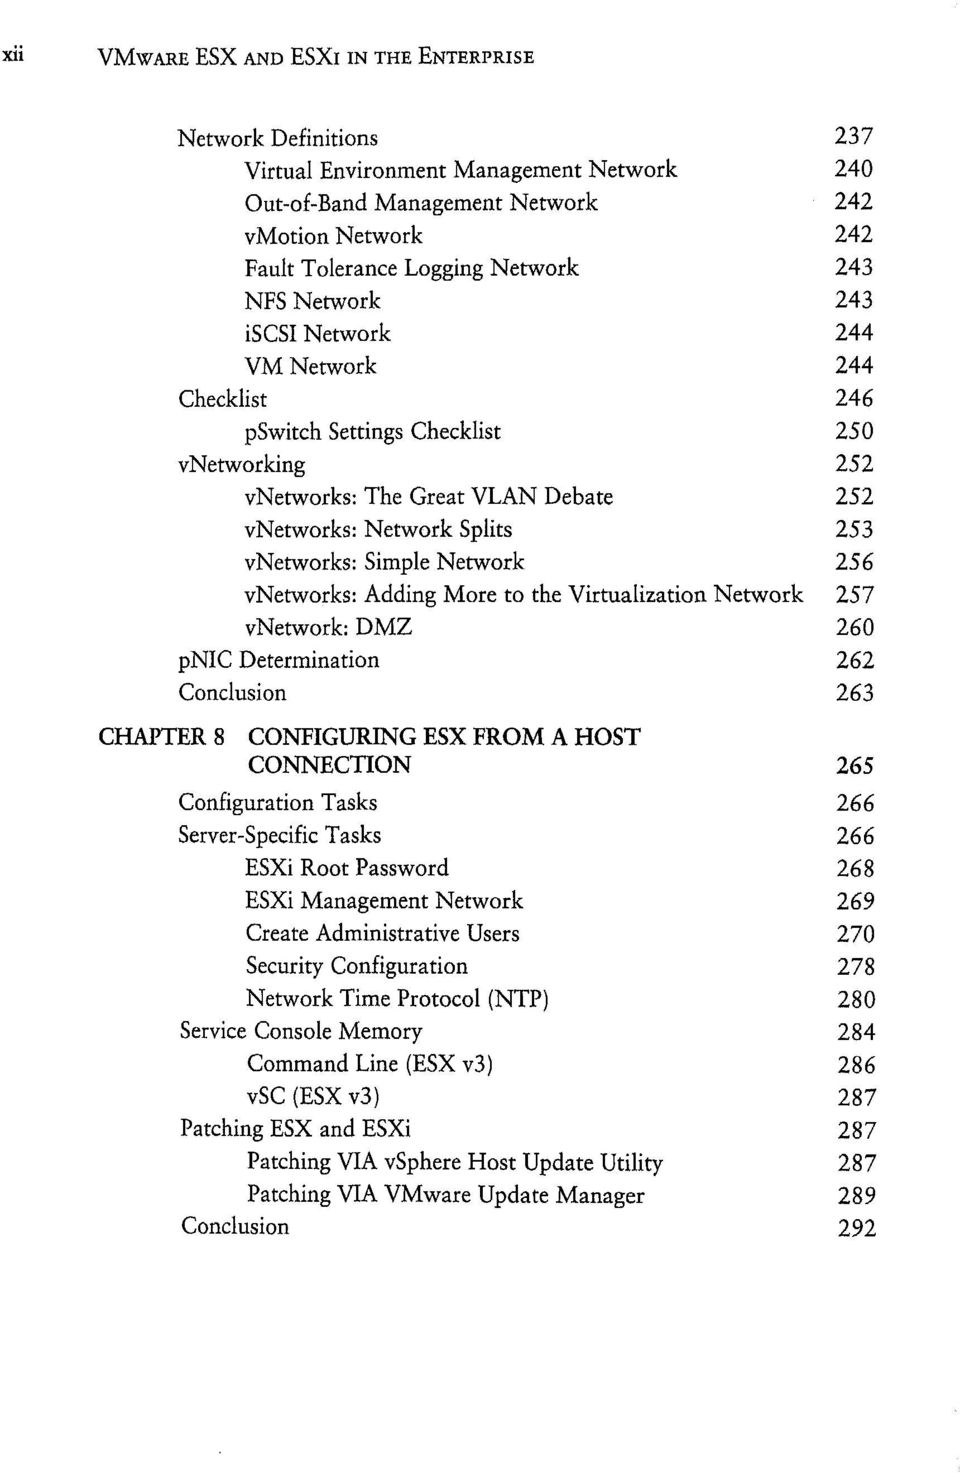 Network 256 vnetworks: Adding More to the Virtualization Network 257 vnetwork: DMZ 260 pnic Determination 262 Conclusion 263 CHAPTER 8 CONFIGURING ESX FROM A HOST CONNECTION 265 Configuration Tasks